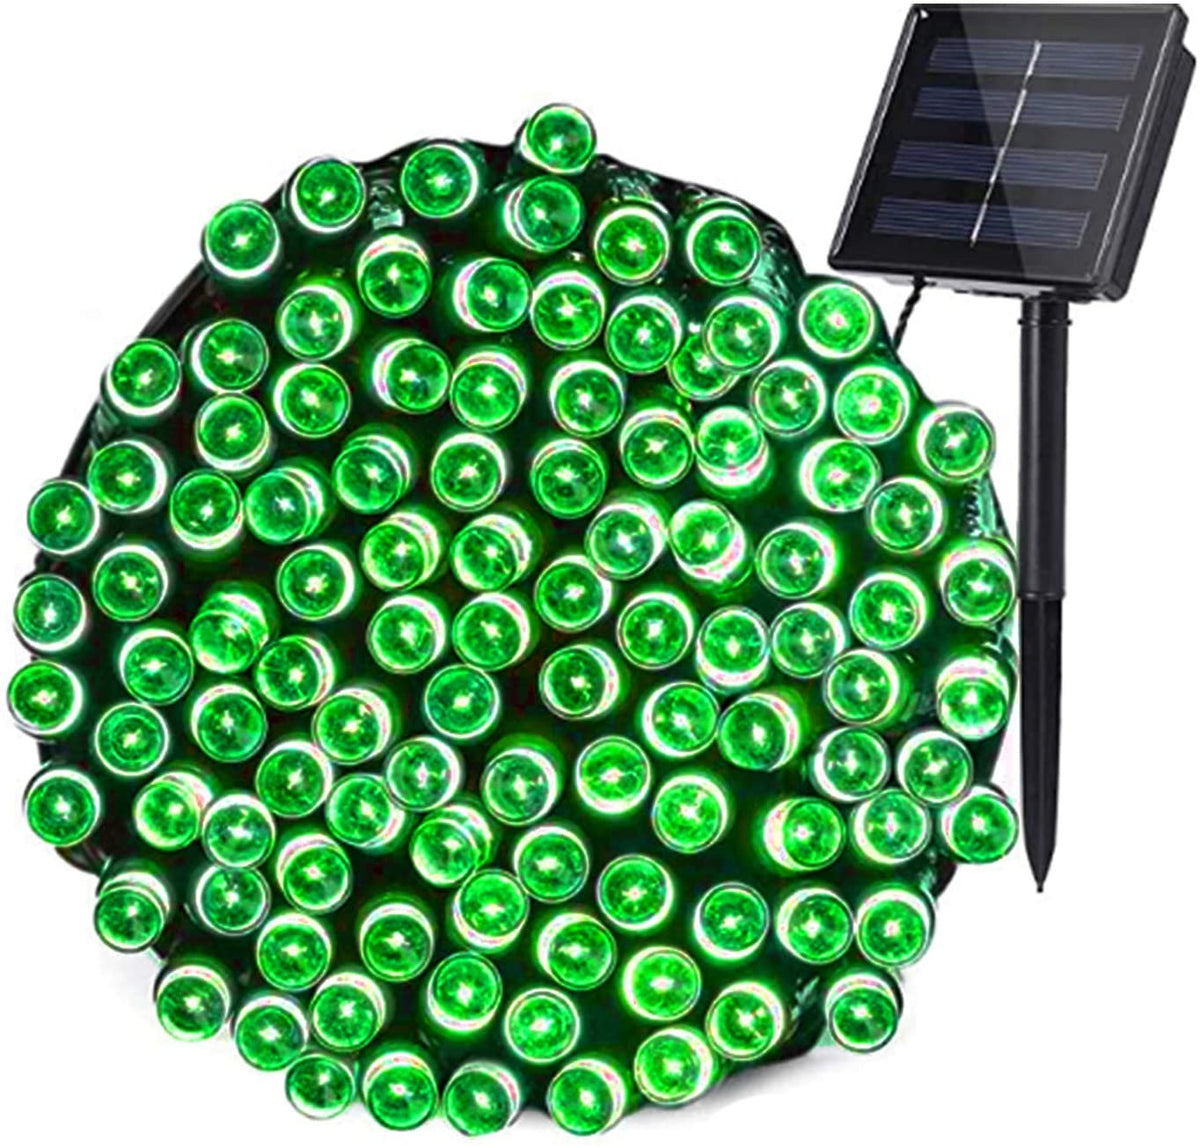 100 LED Solar String Lights 42ft 8 Modes Outdoor Waterproof Lights for Garden, Tree, Yard, Christmas, Wedding, Party